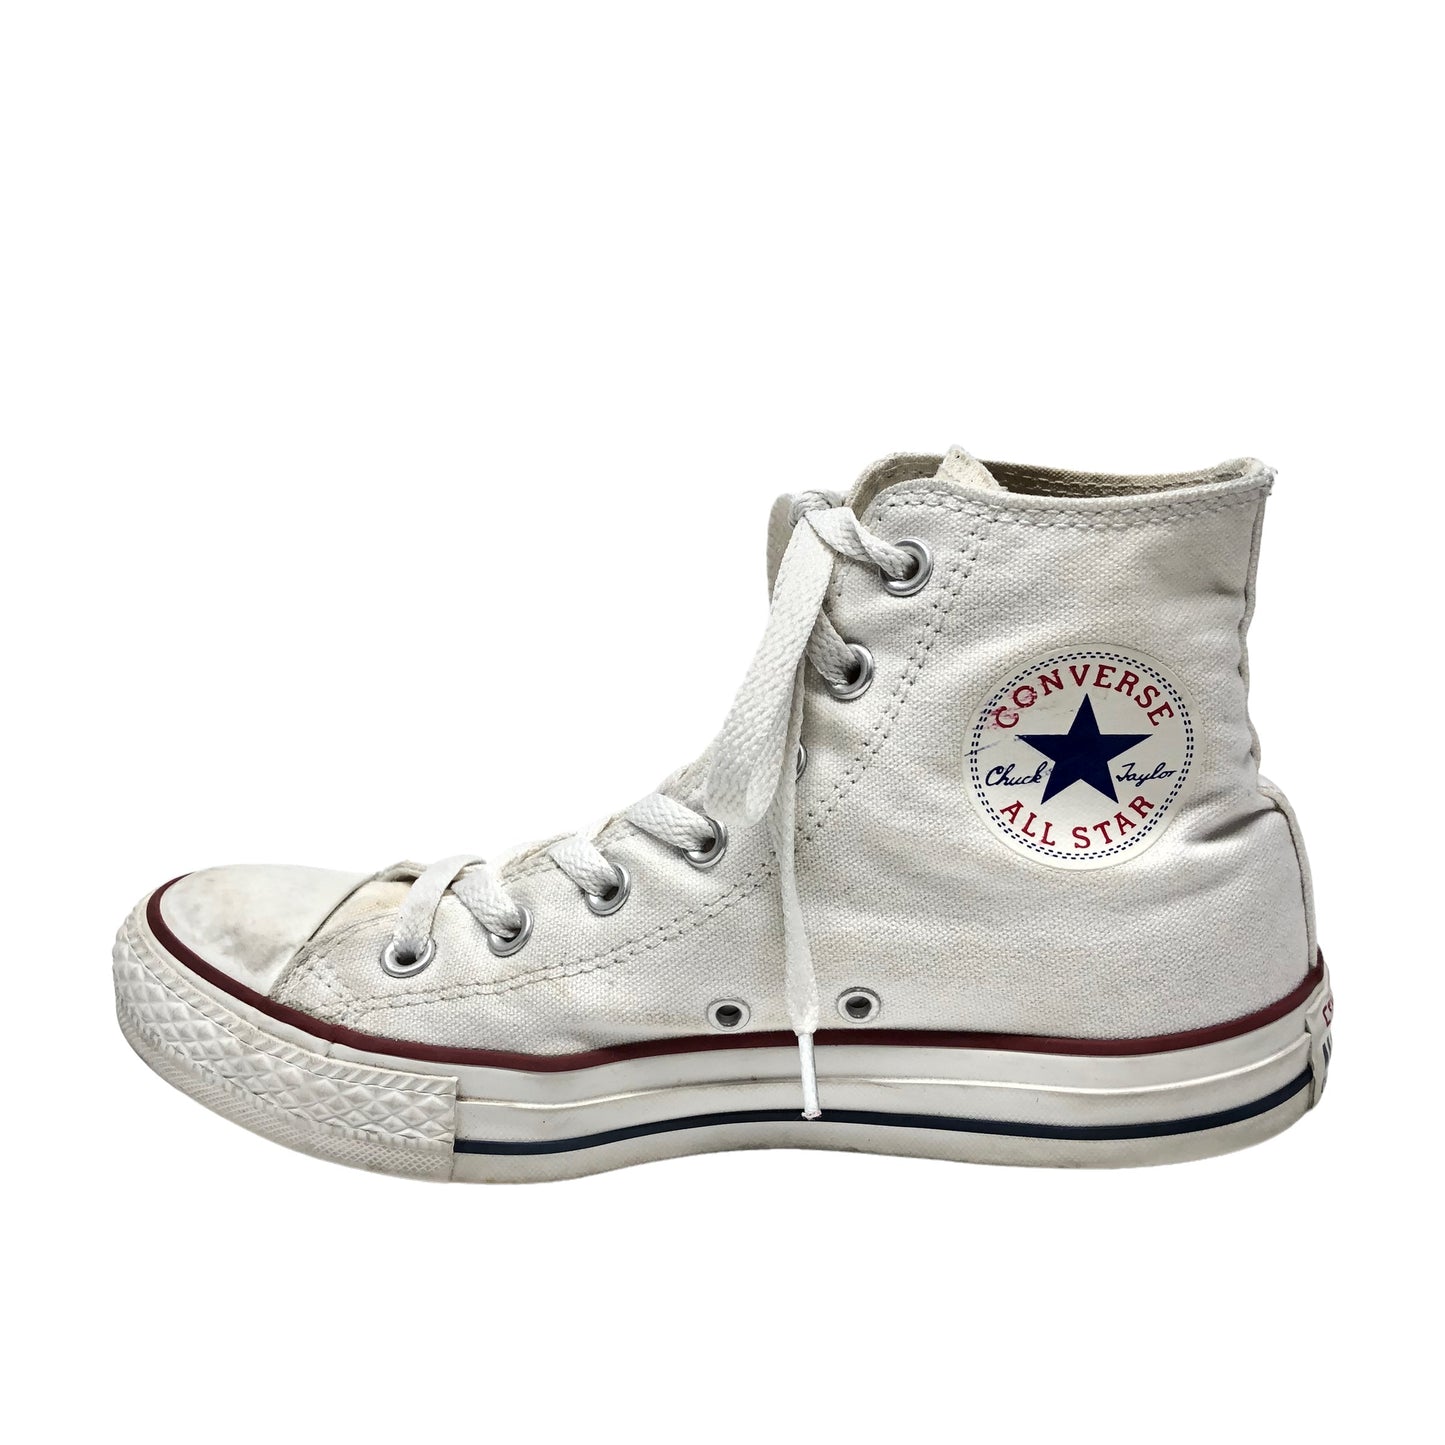 White Shoes Sneakers Converse, Size 8